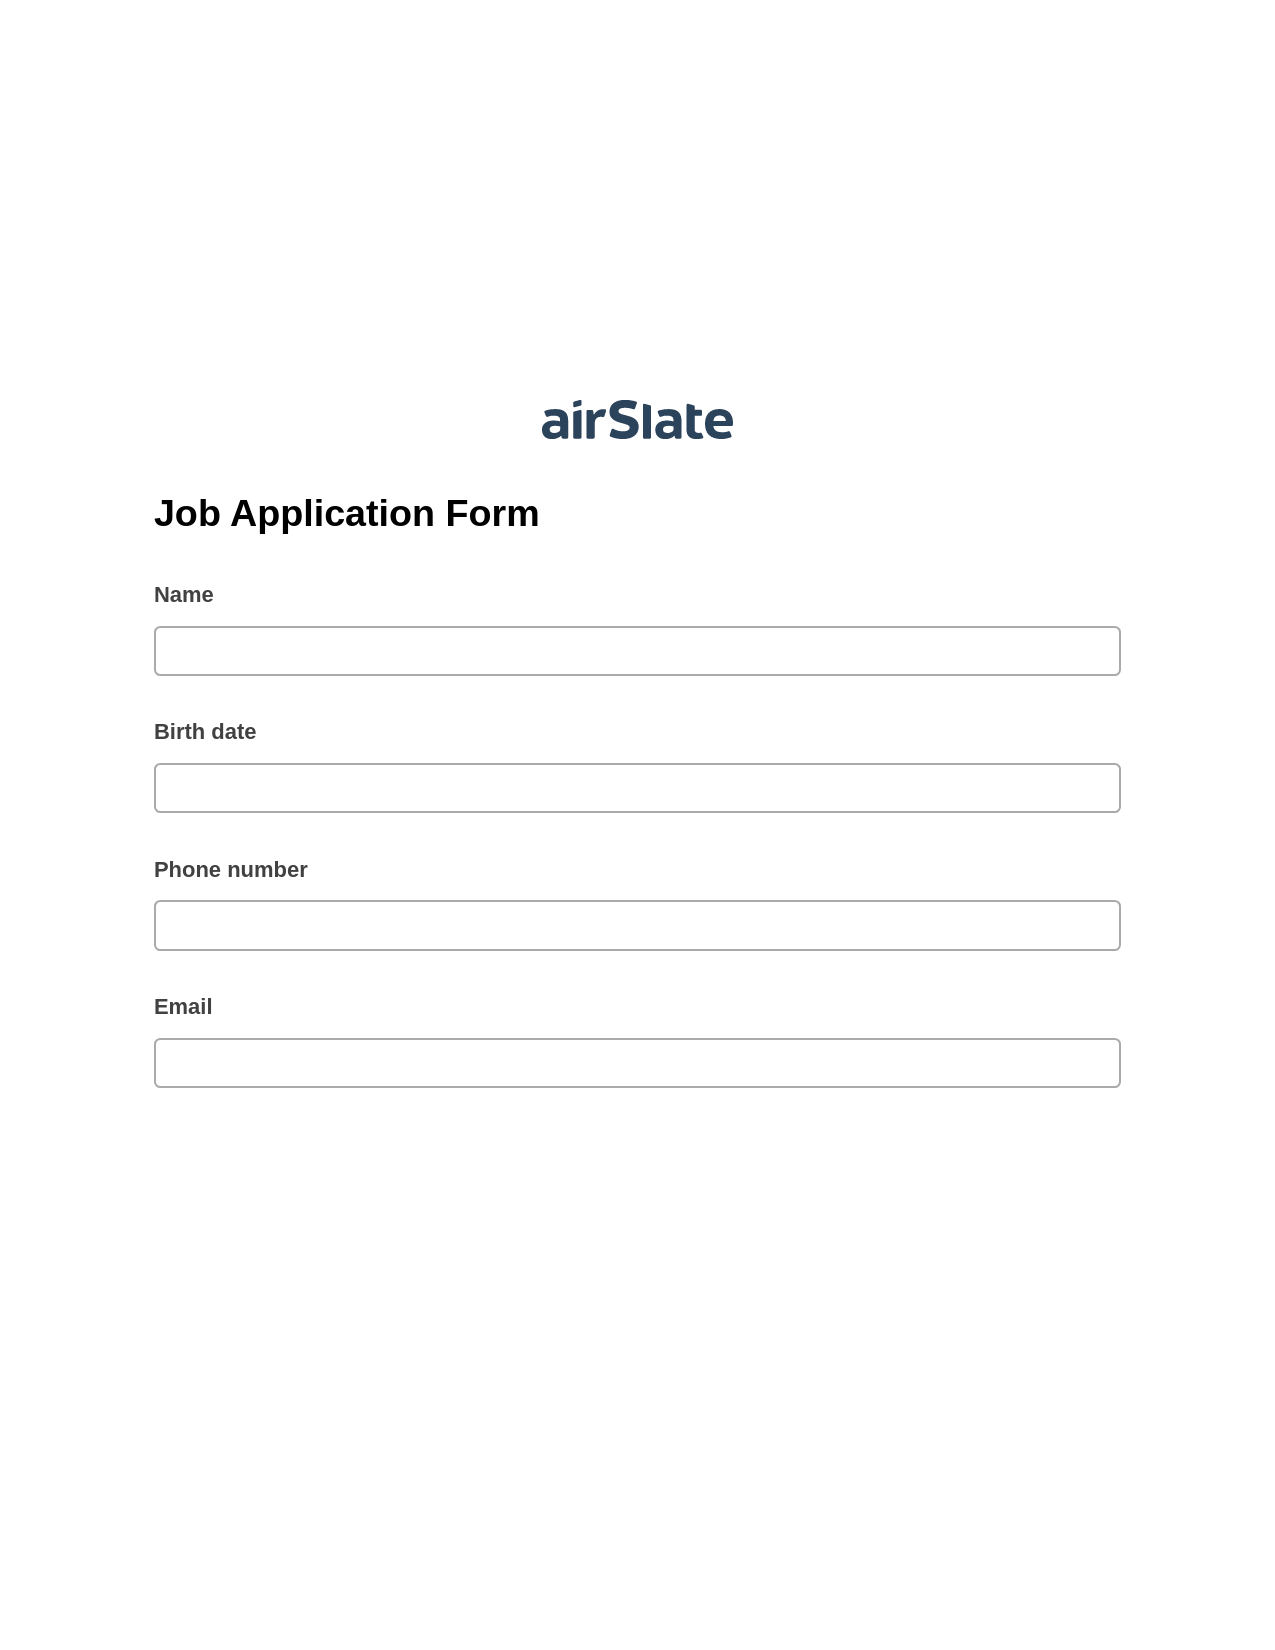 Multirole Job Application Form System Bot - Slack Two-Way Binding Bot, Pre-fill with Custom Data Bot, Export to Excel 365 Bot